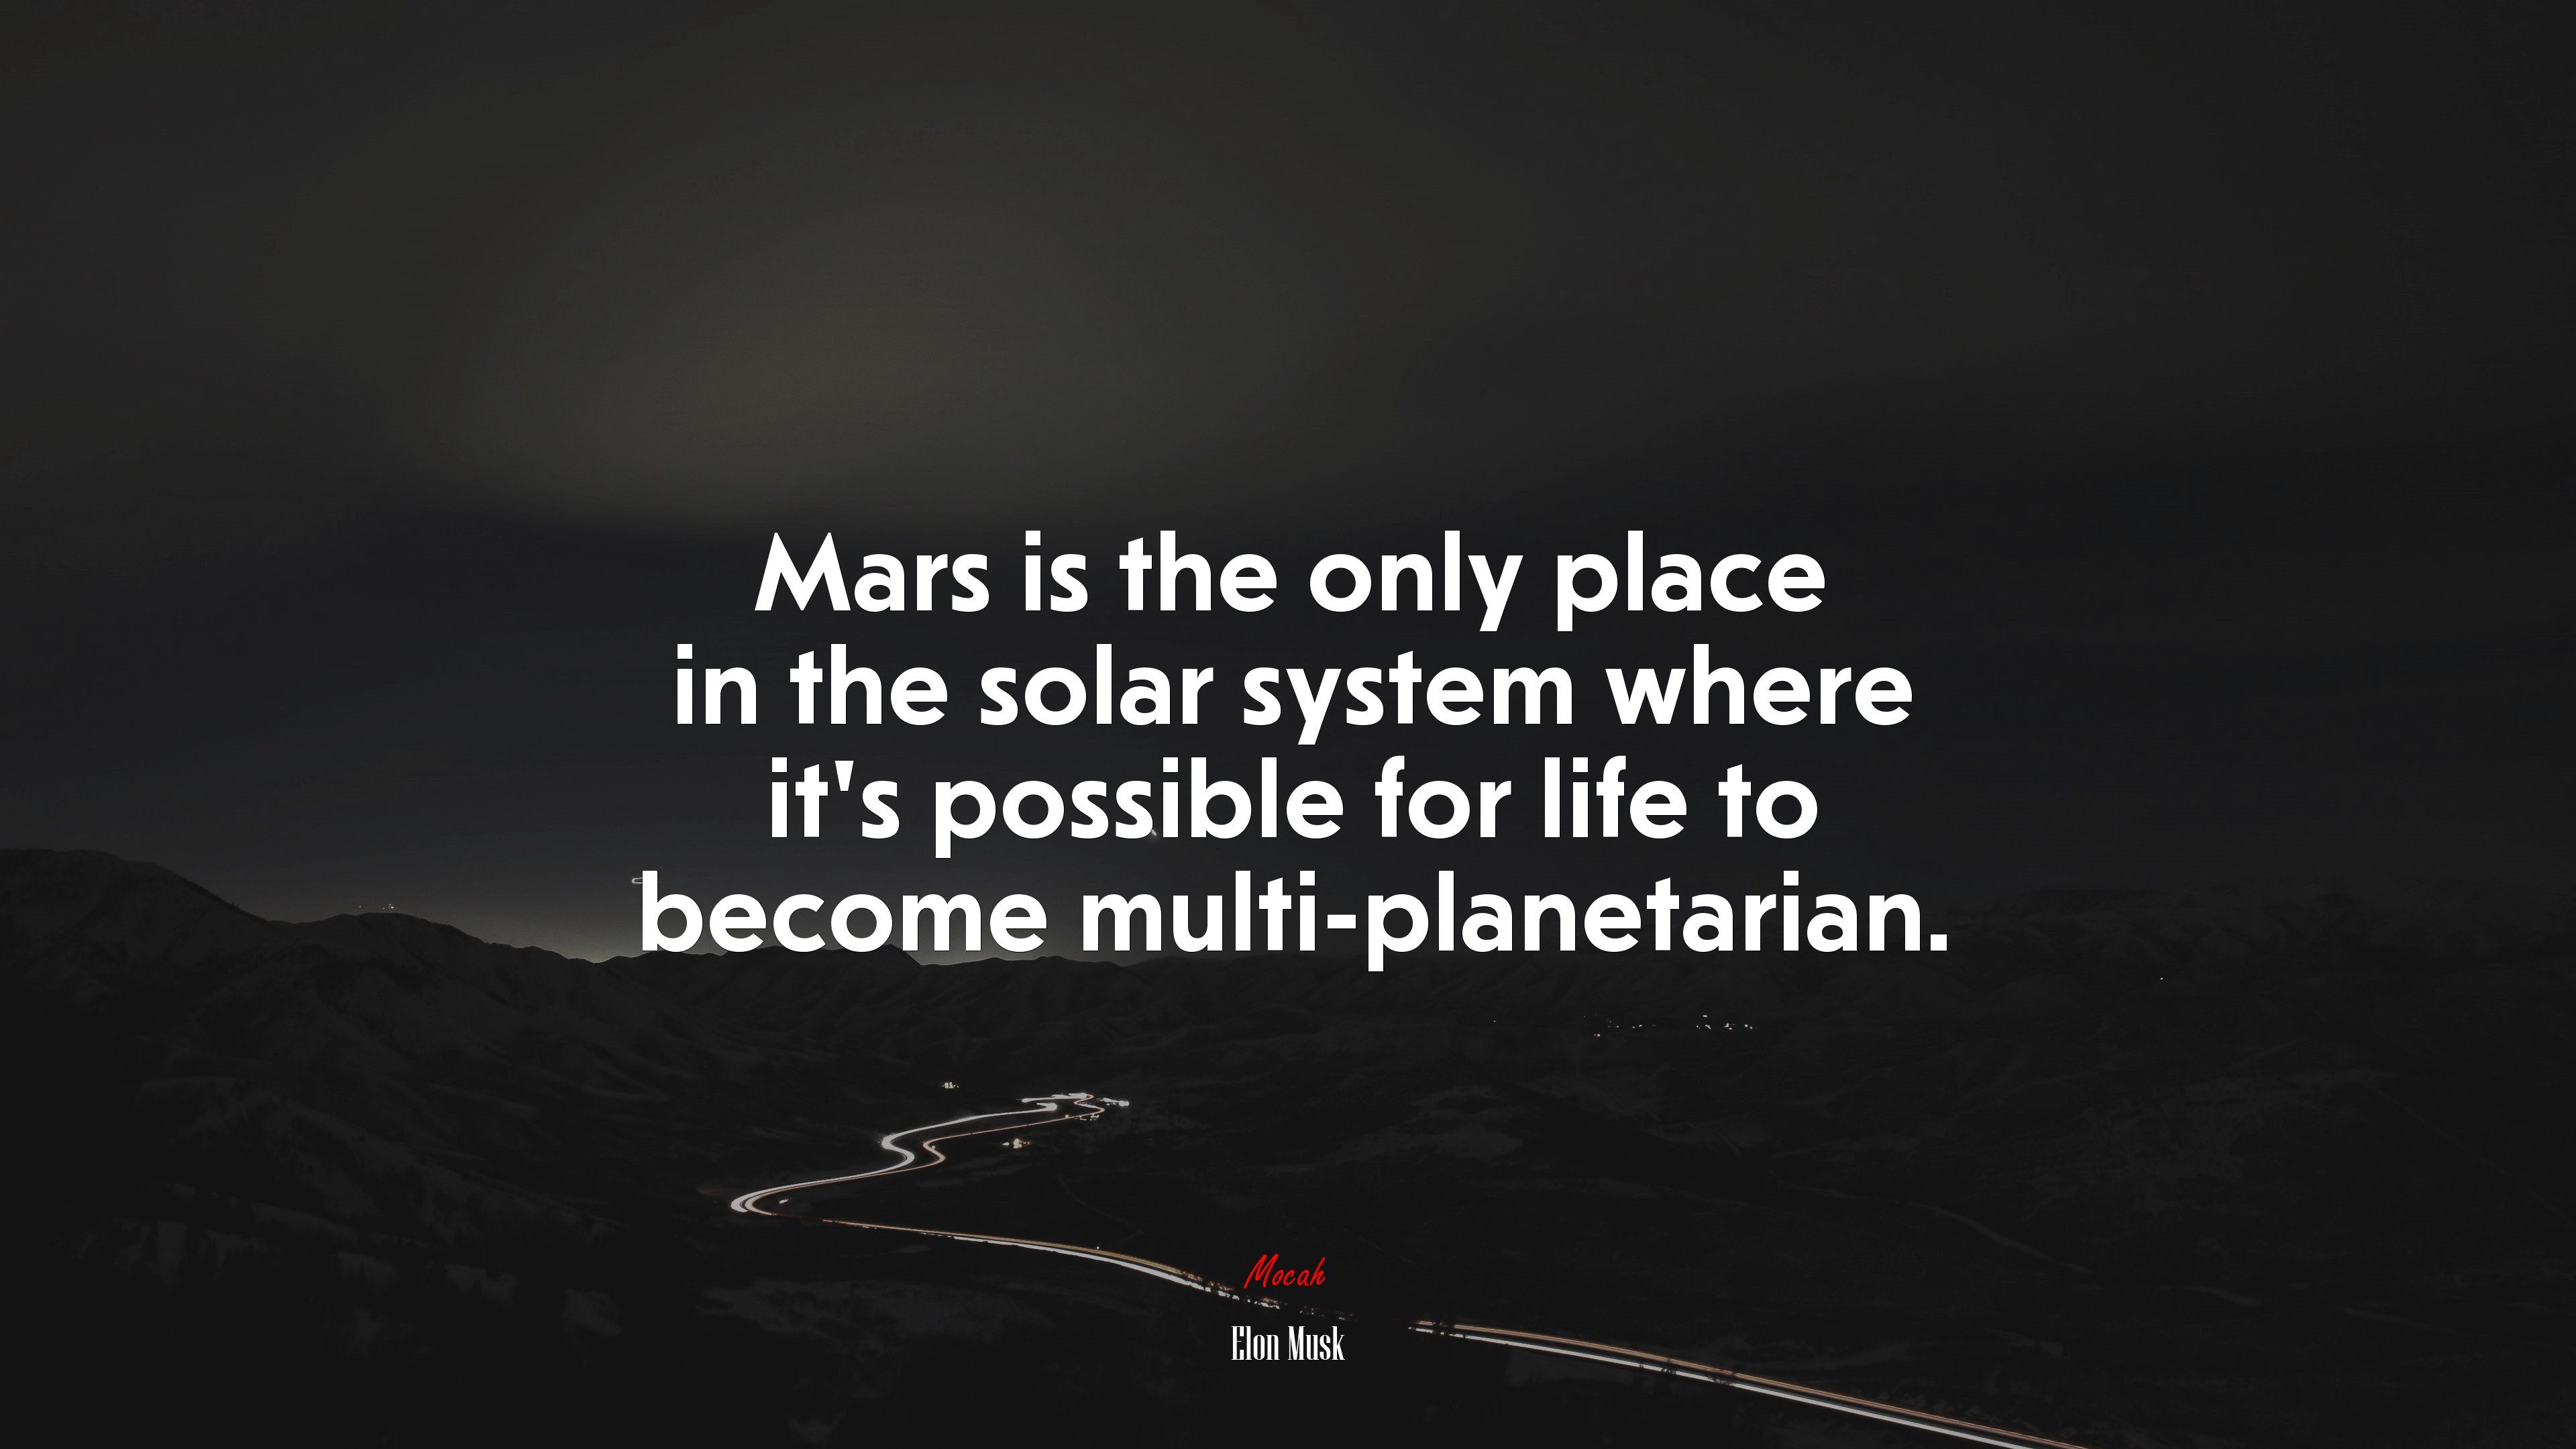 Mars Is The Only Place In The Solar System Where It's Possible For Life To Become Multi Planetarian. Elon Musk Quote, 4k Wallpaper. Mocah.org HD Desktop Wallpaper